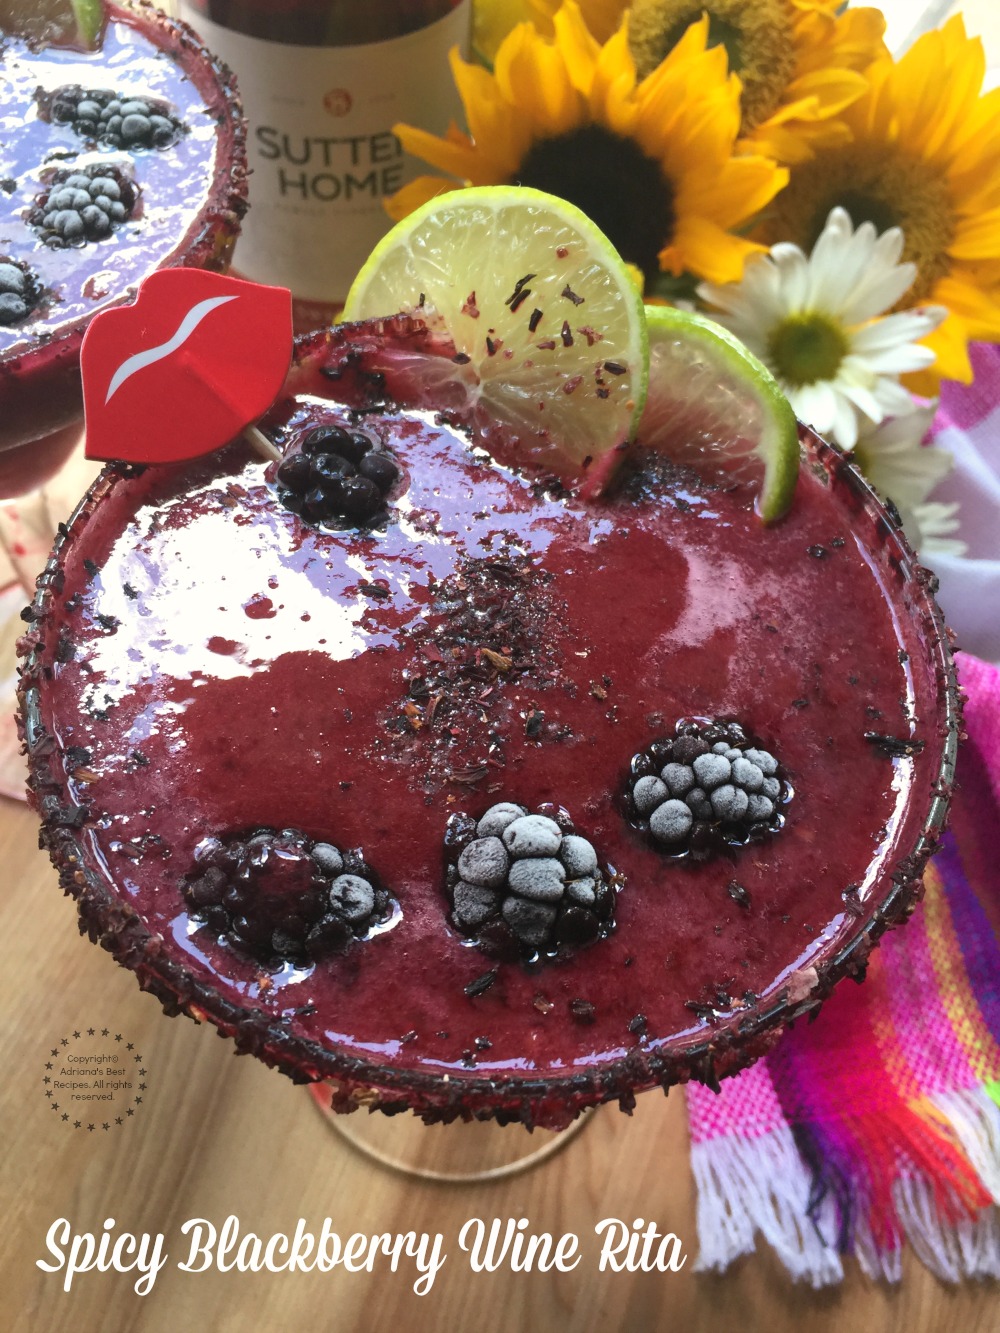 Cheers with this Spicy Blackberry Wine Rita made with frozen store bought margarita mix, blackberries, green habanero sauce, tequila blanco, hibiscus salt and Sutter Home Sweet Red Wine